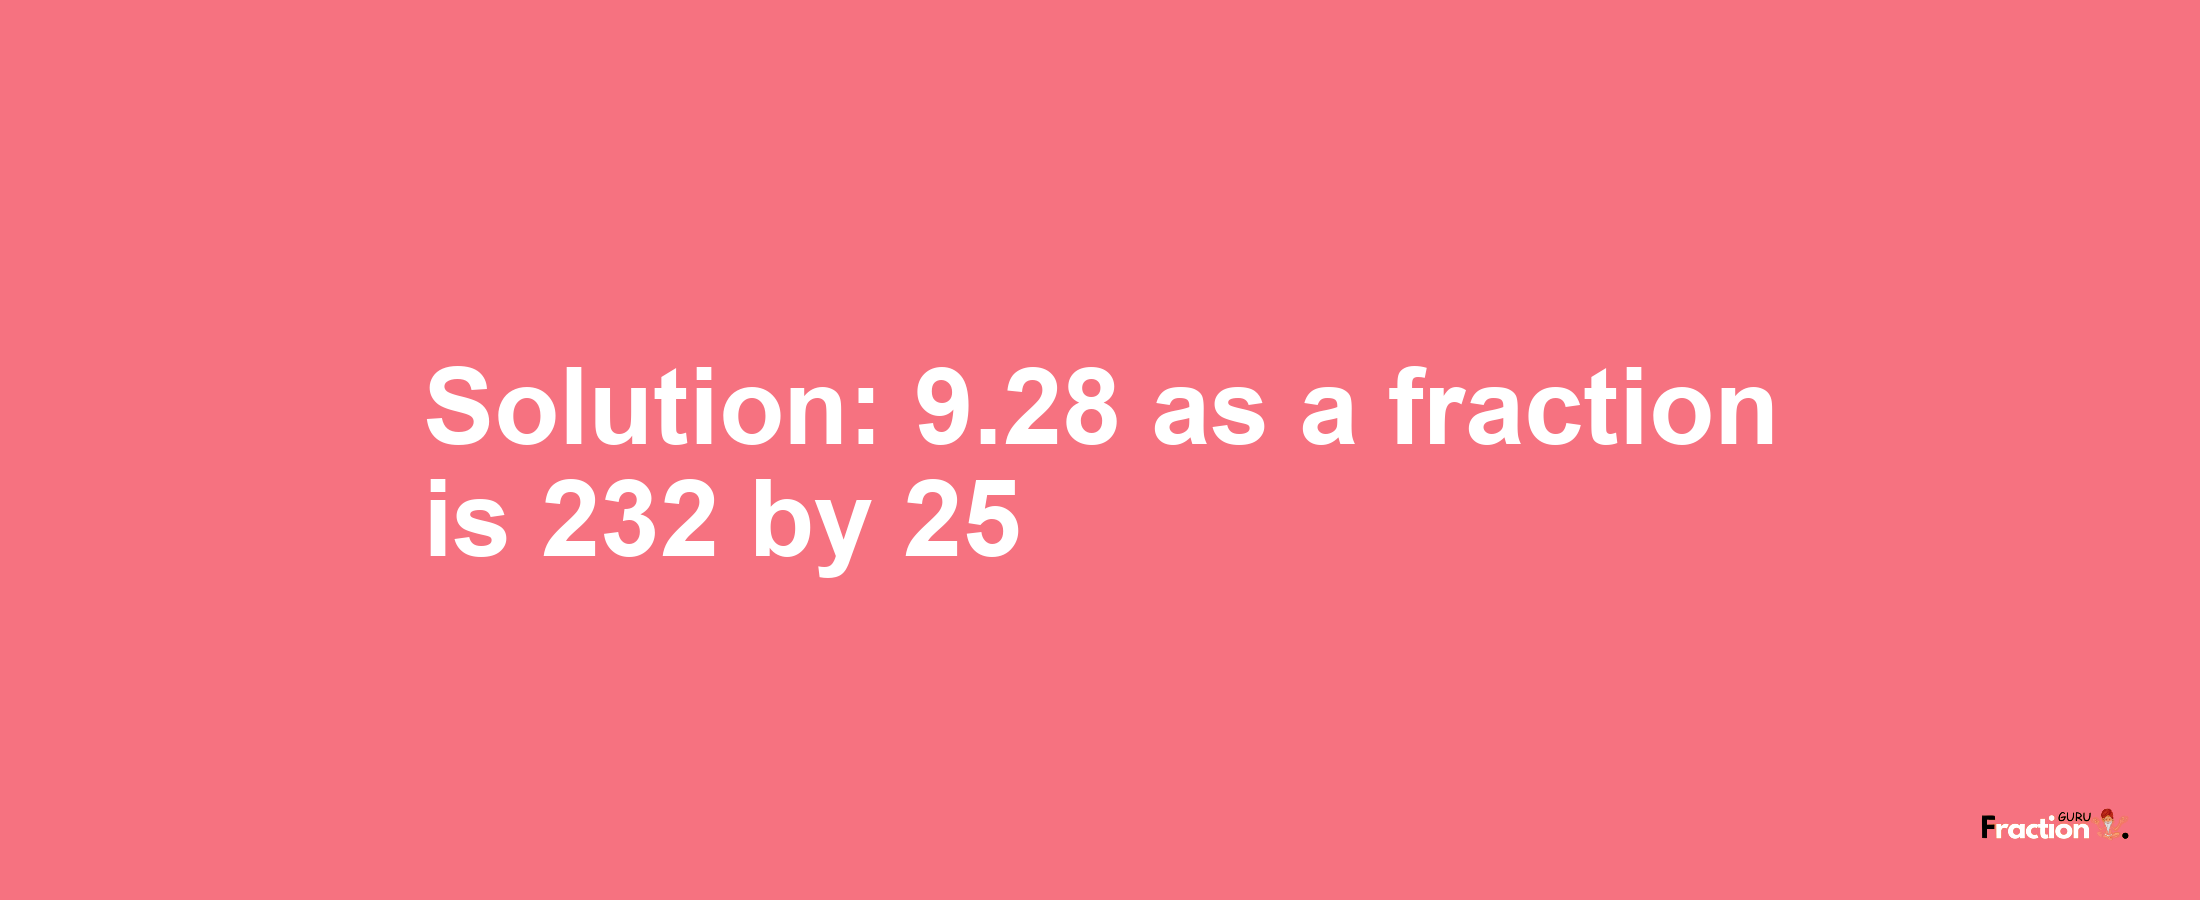 Solution:9.28 as a fraction is 232/25